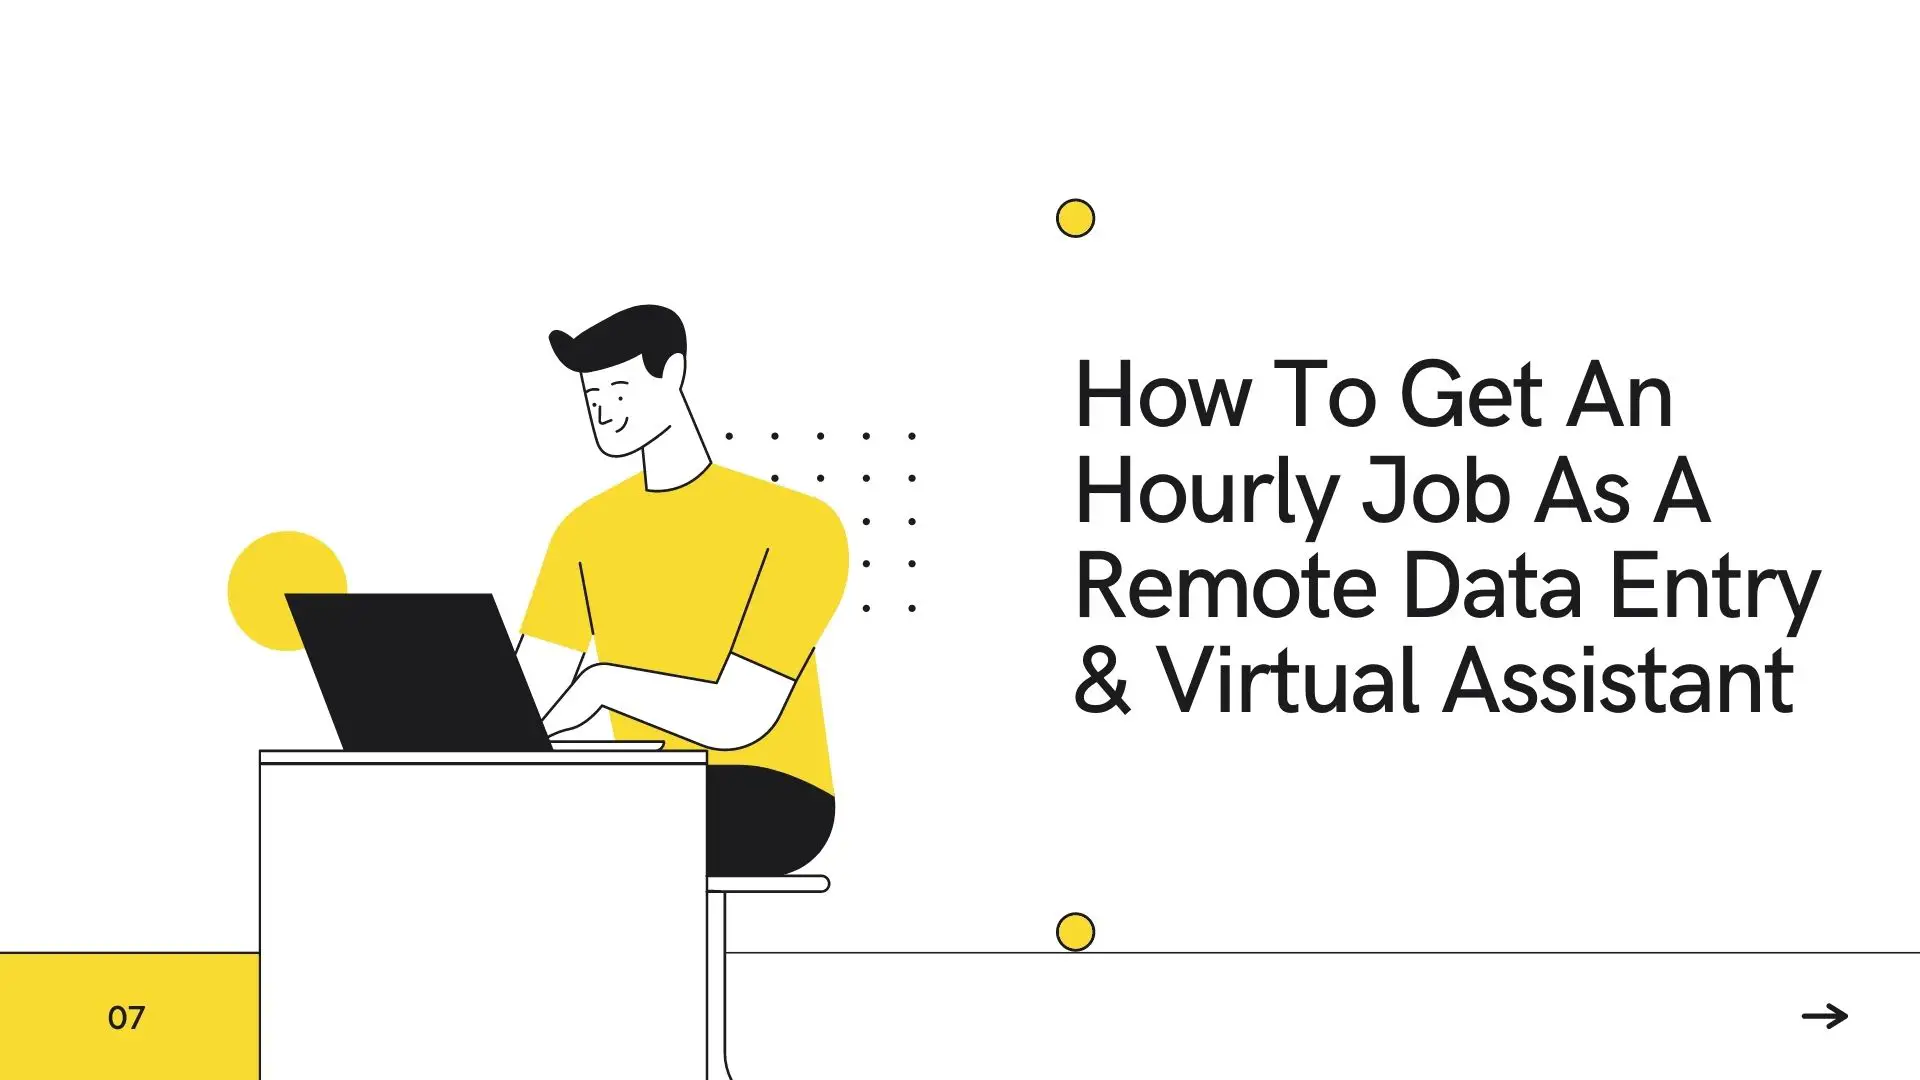 How To Get An Hourly Job As A Remote Data Entry & Virtual Assistant